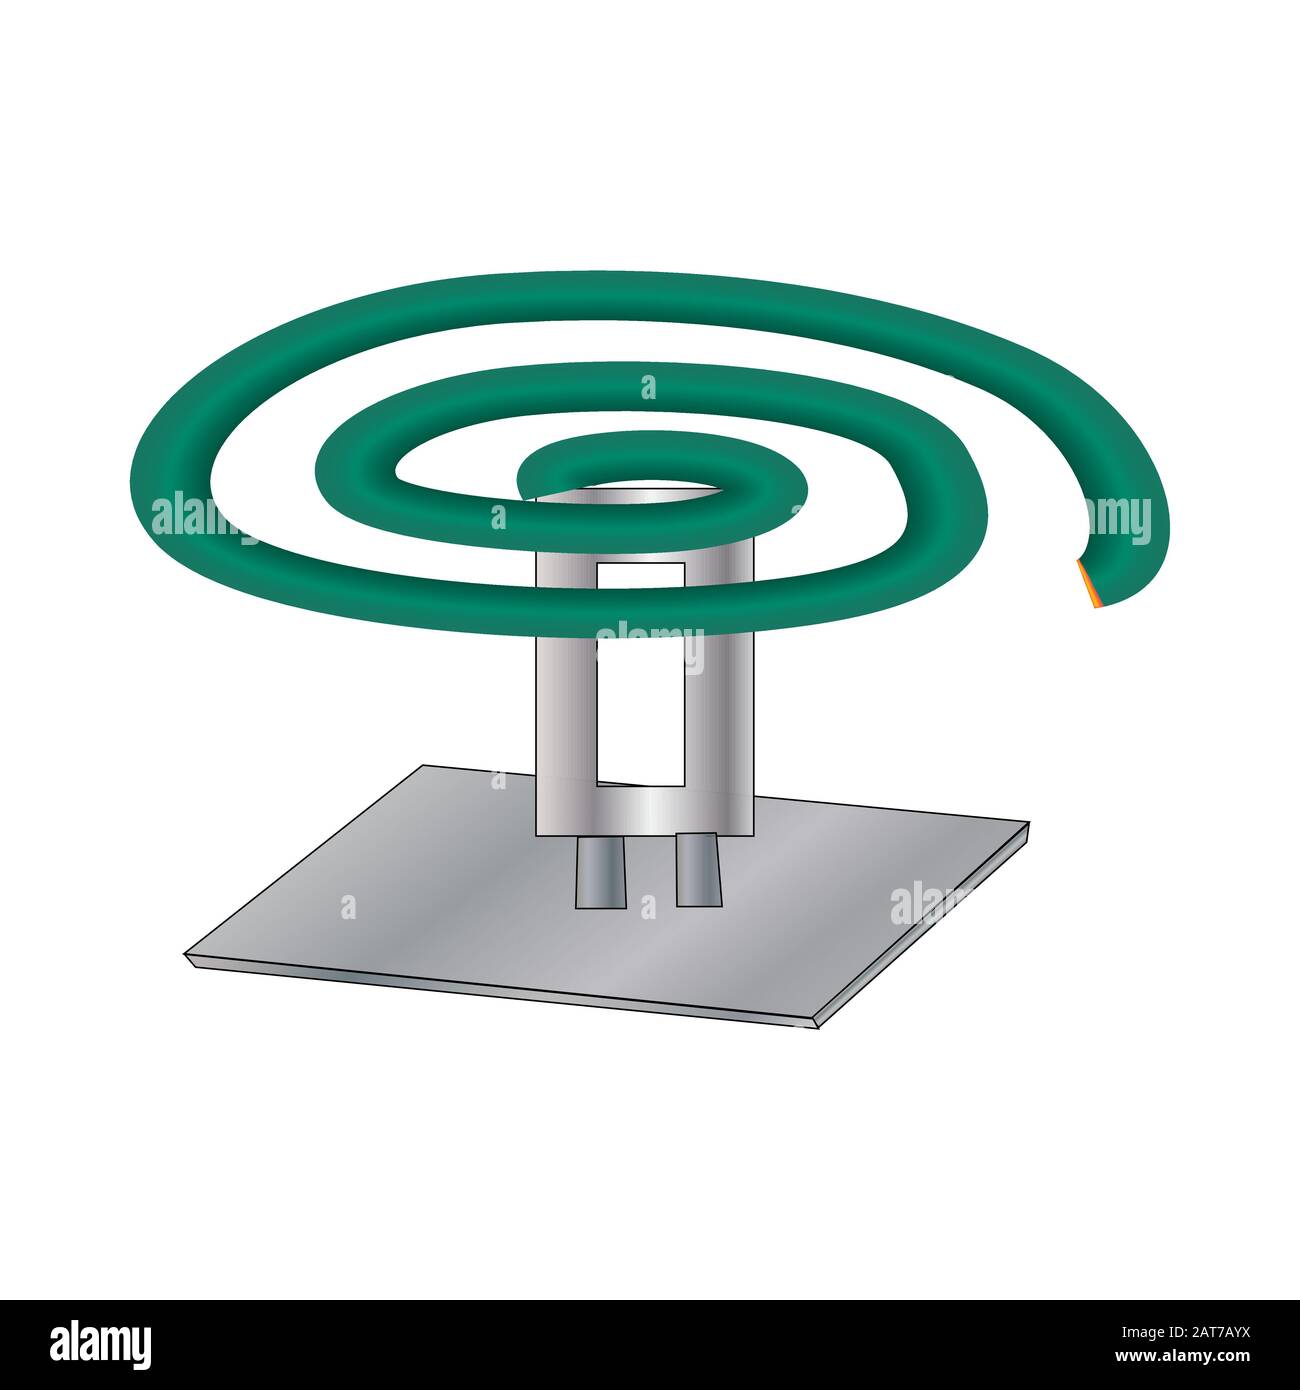 Mosquito repellent green coil on white background. Mosquito smoking coil to repel pests. Insect killer smoldering spiral incense. Vector illustration. Stock Vector